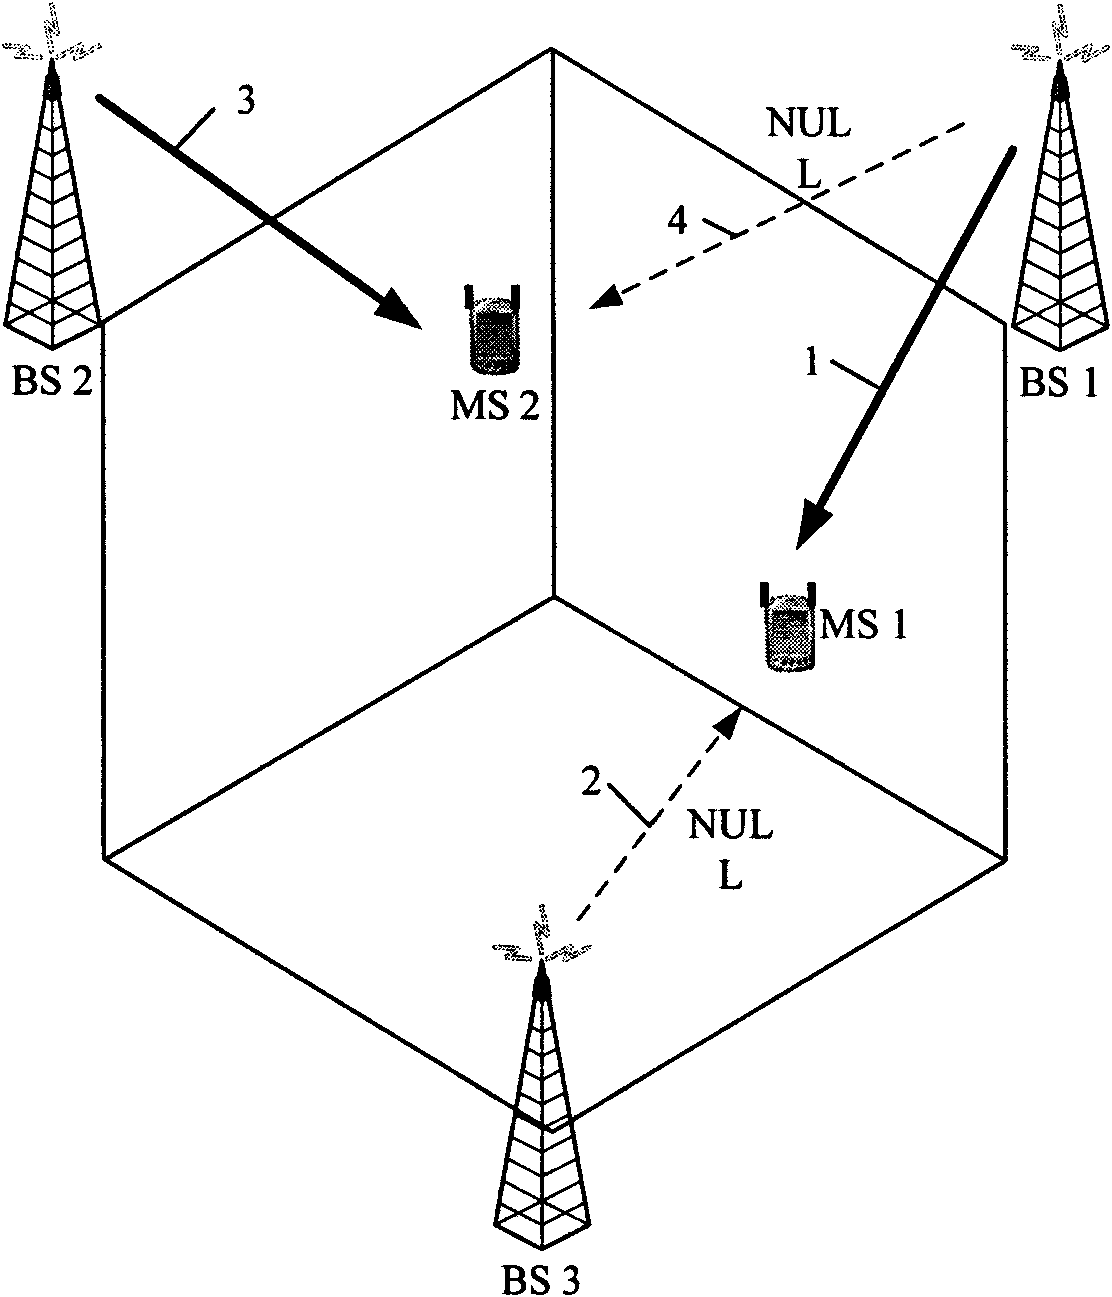 Local scheduler-based multi-point cooperative transmission method